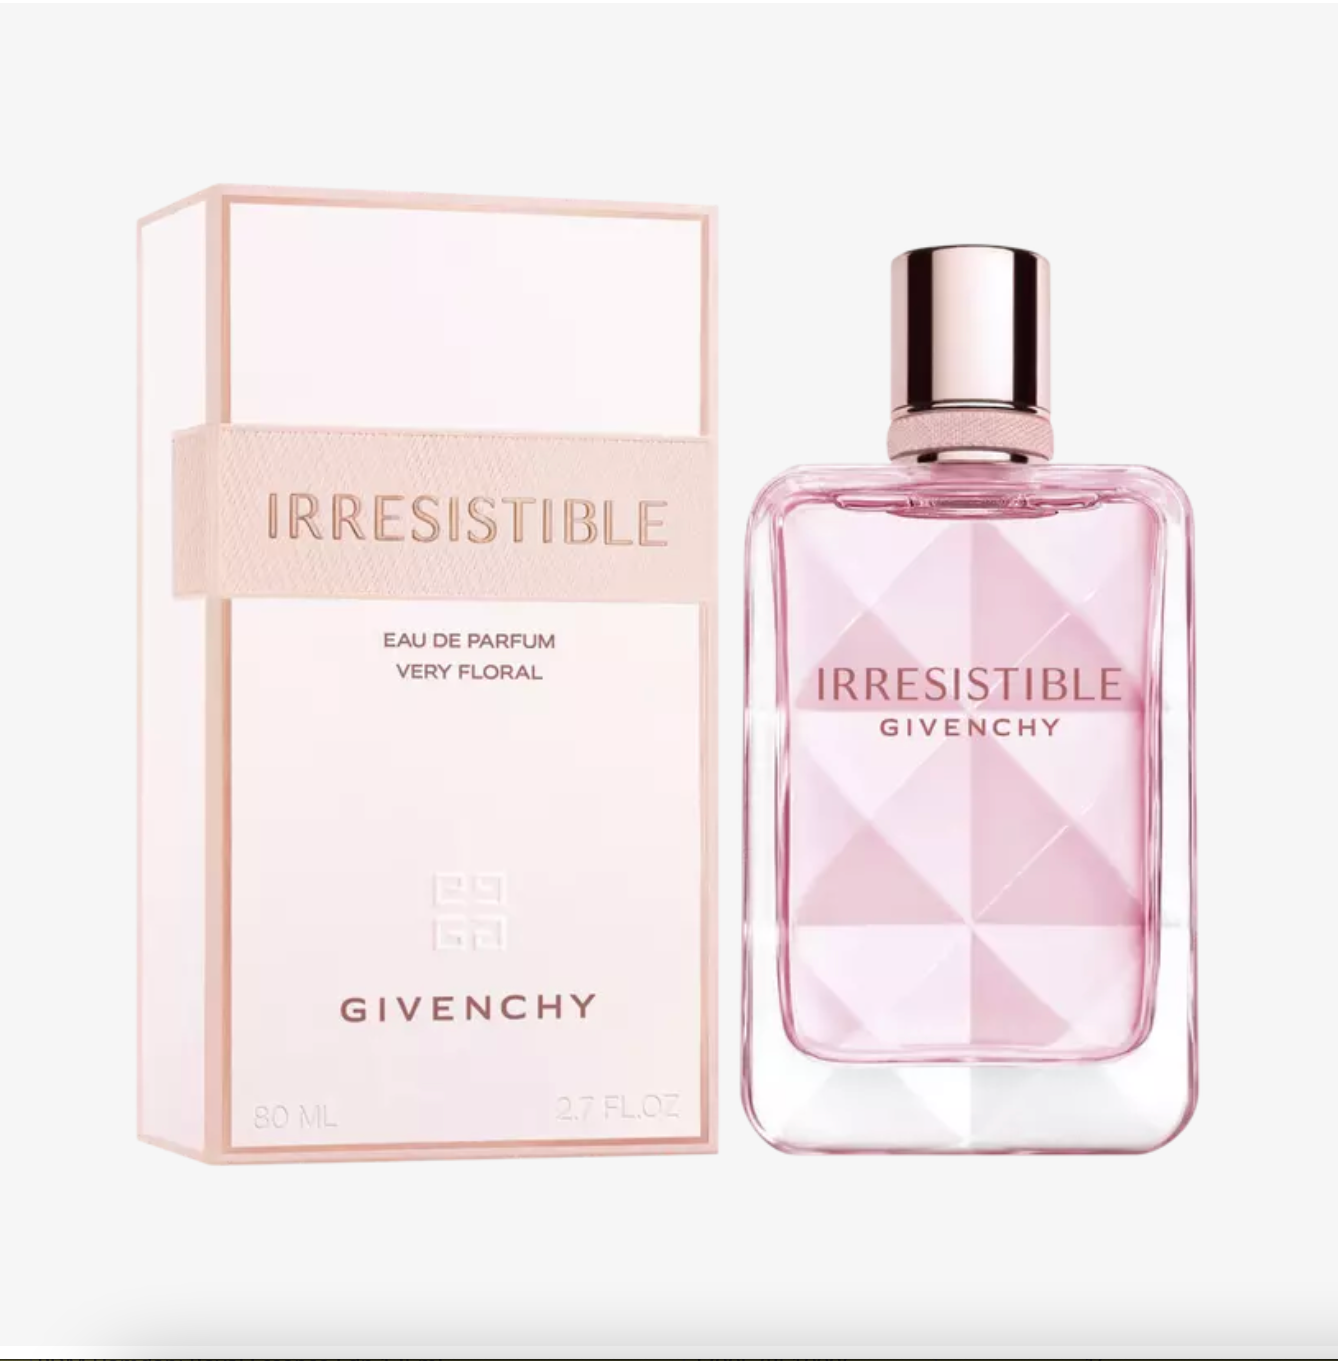 Givenchy Irresistible Very Floral EDP 80ml